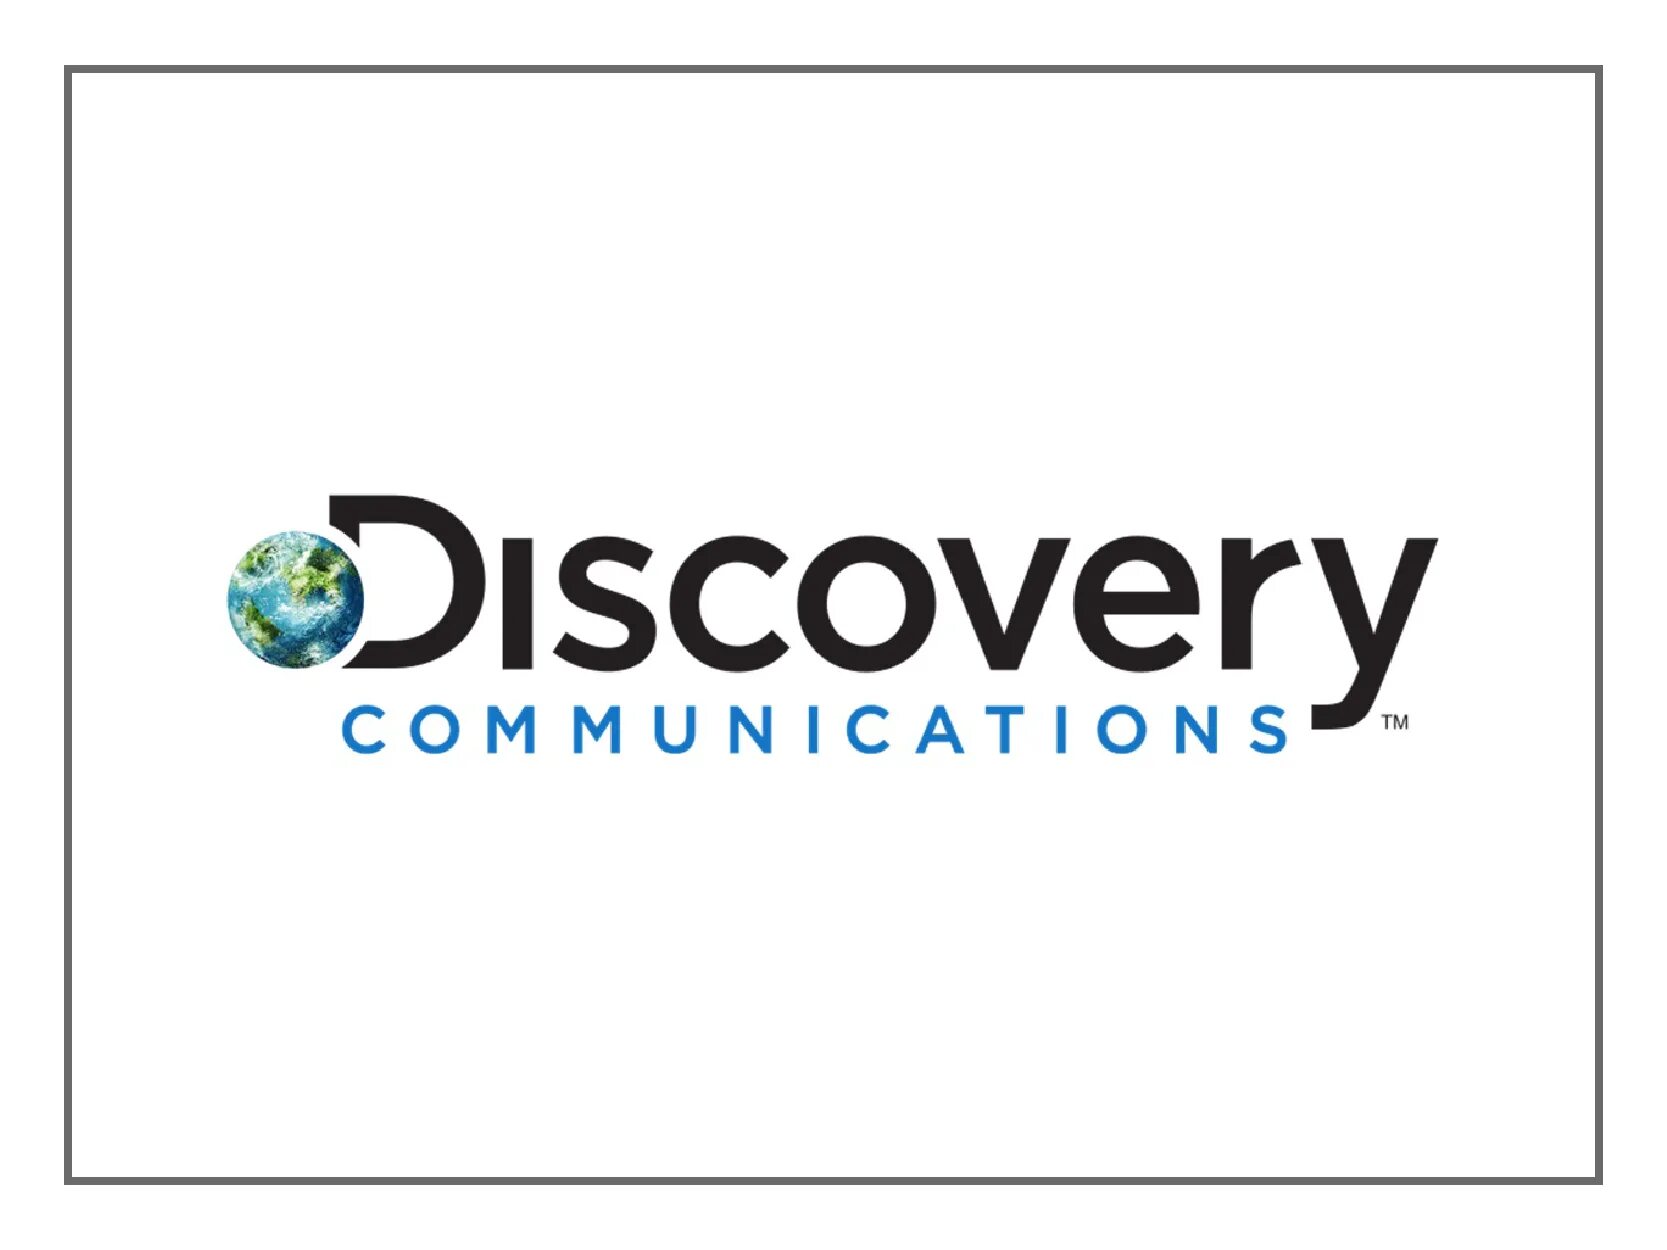 Discover and see. Discovery communications. Discovery компания. Дискавери логотип. Дискавери логотип 2010.